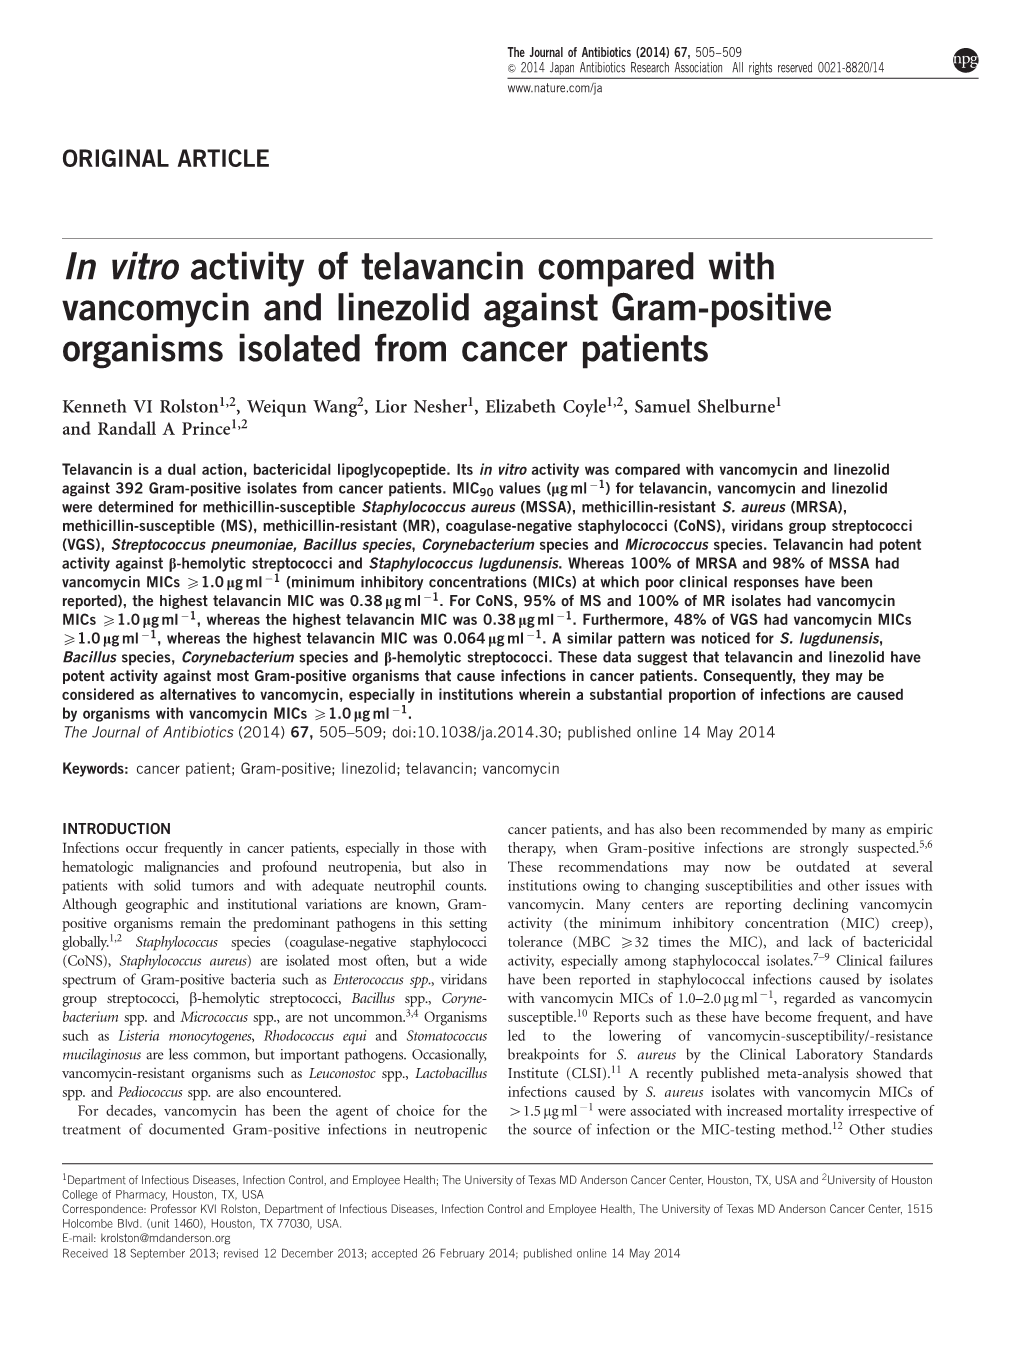 In Vitro Activity of Telavancin Compared with Vancomycin and Linezolid Against Gram-Positive Organisms Isolated from Cancer Patients